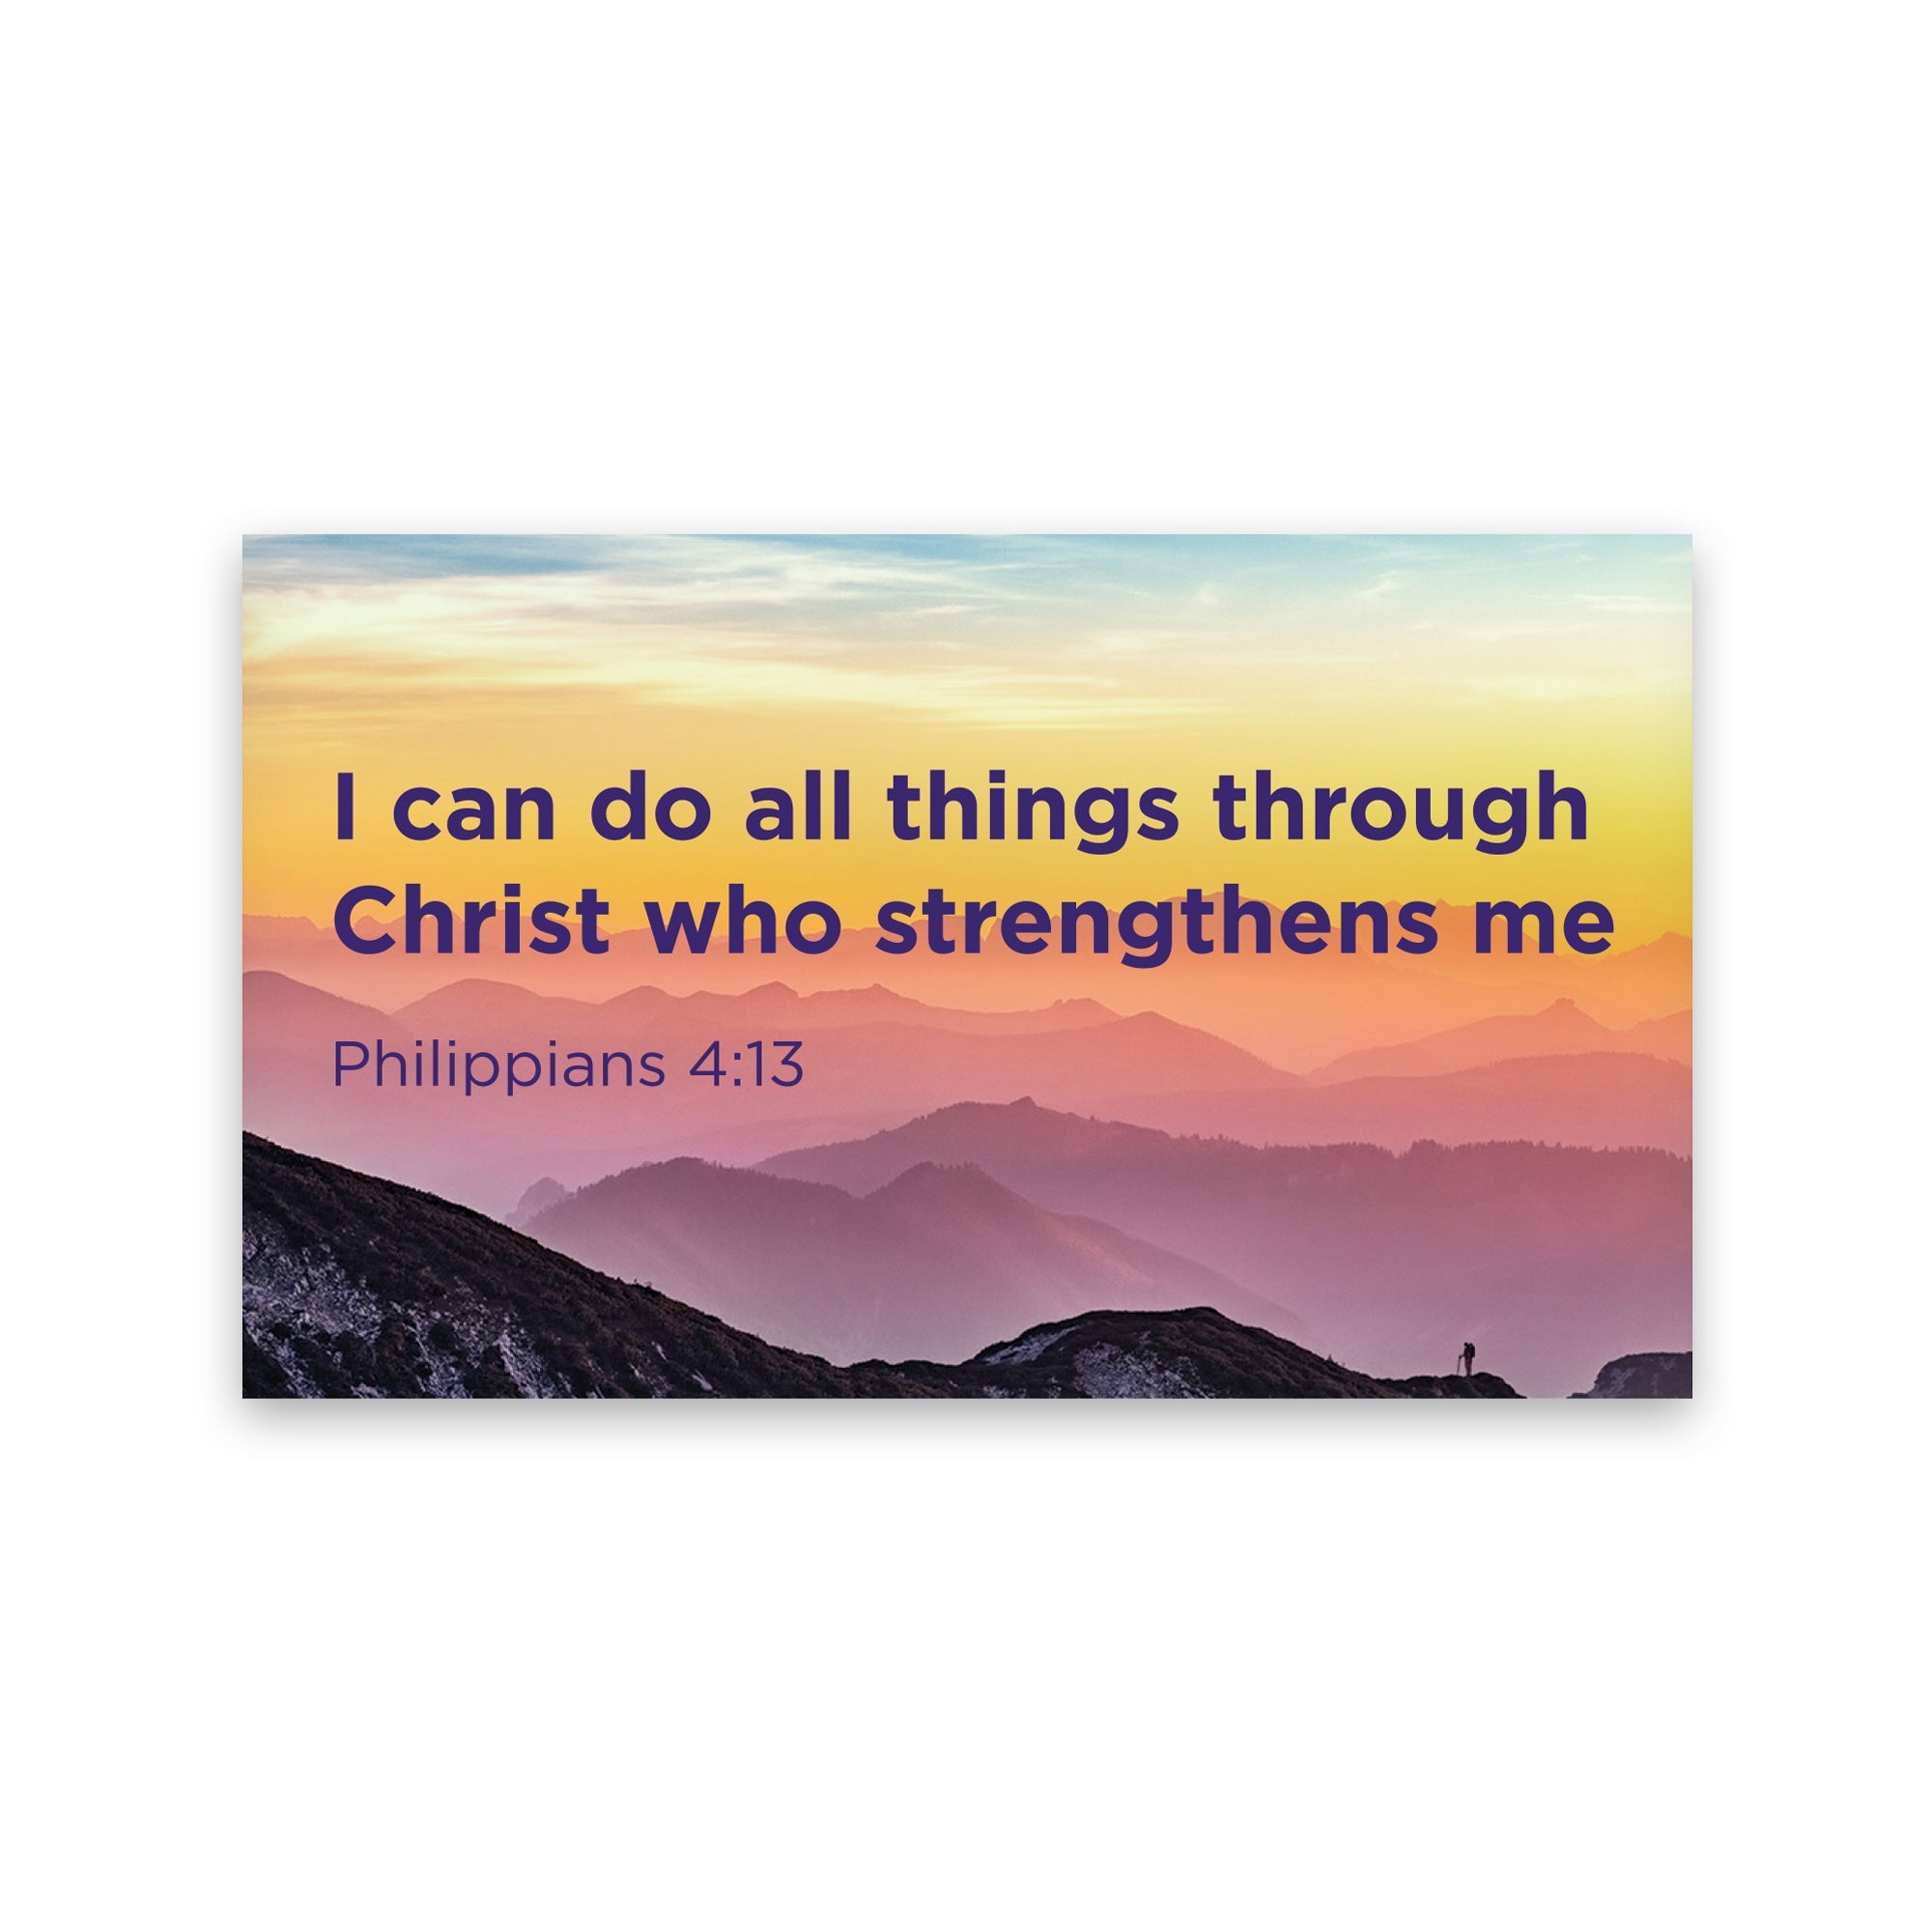 I can do all things through Christ, Philippians 4:13, Pass Along Scripture Cards, Pack of 25